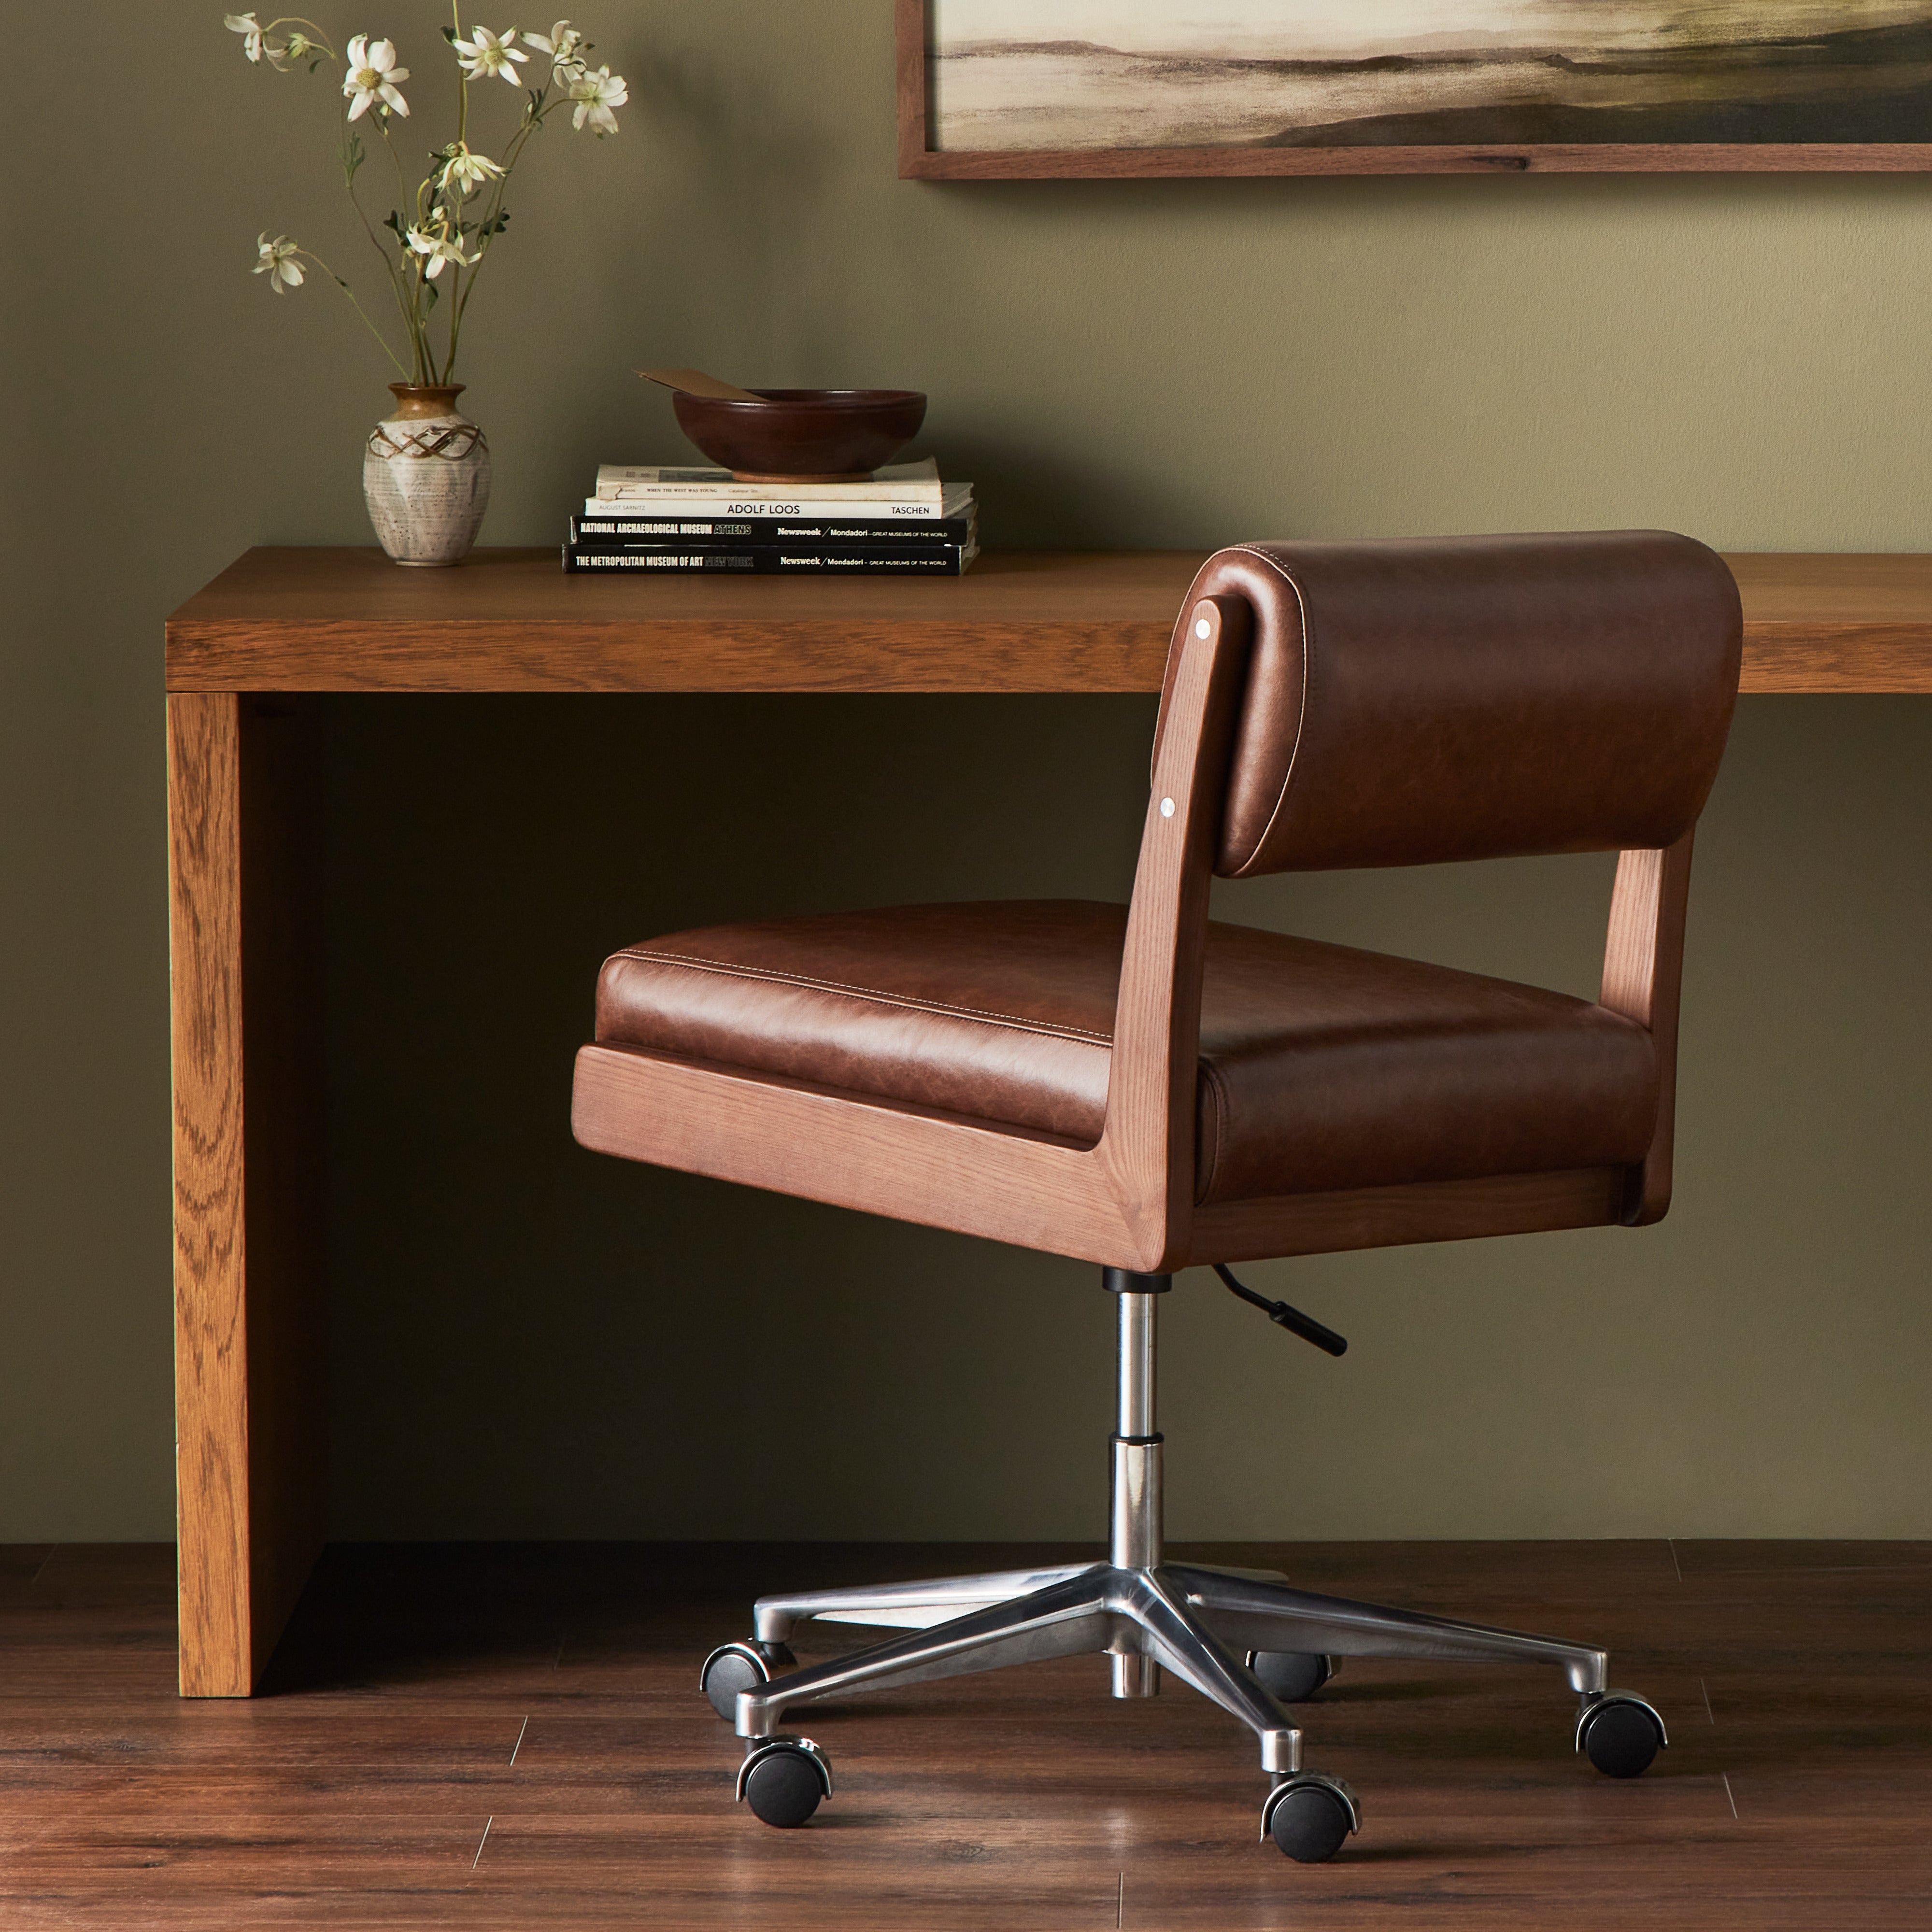 An armless top-grain leather seat and bolster pair with a wooden frame for an understated modern look with a hint of midcentury influence. Amethyst Home provides interior design, new construction, custom furniture, and area rugs in the Portland metro area.